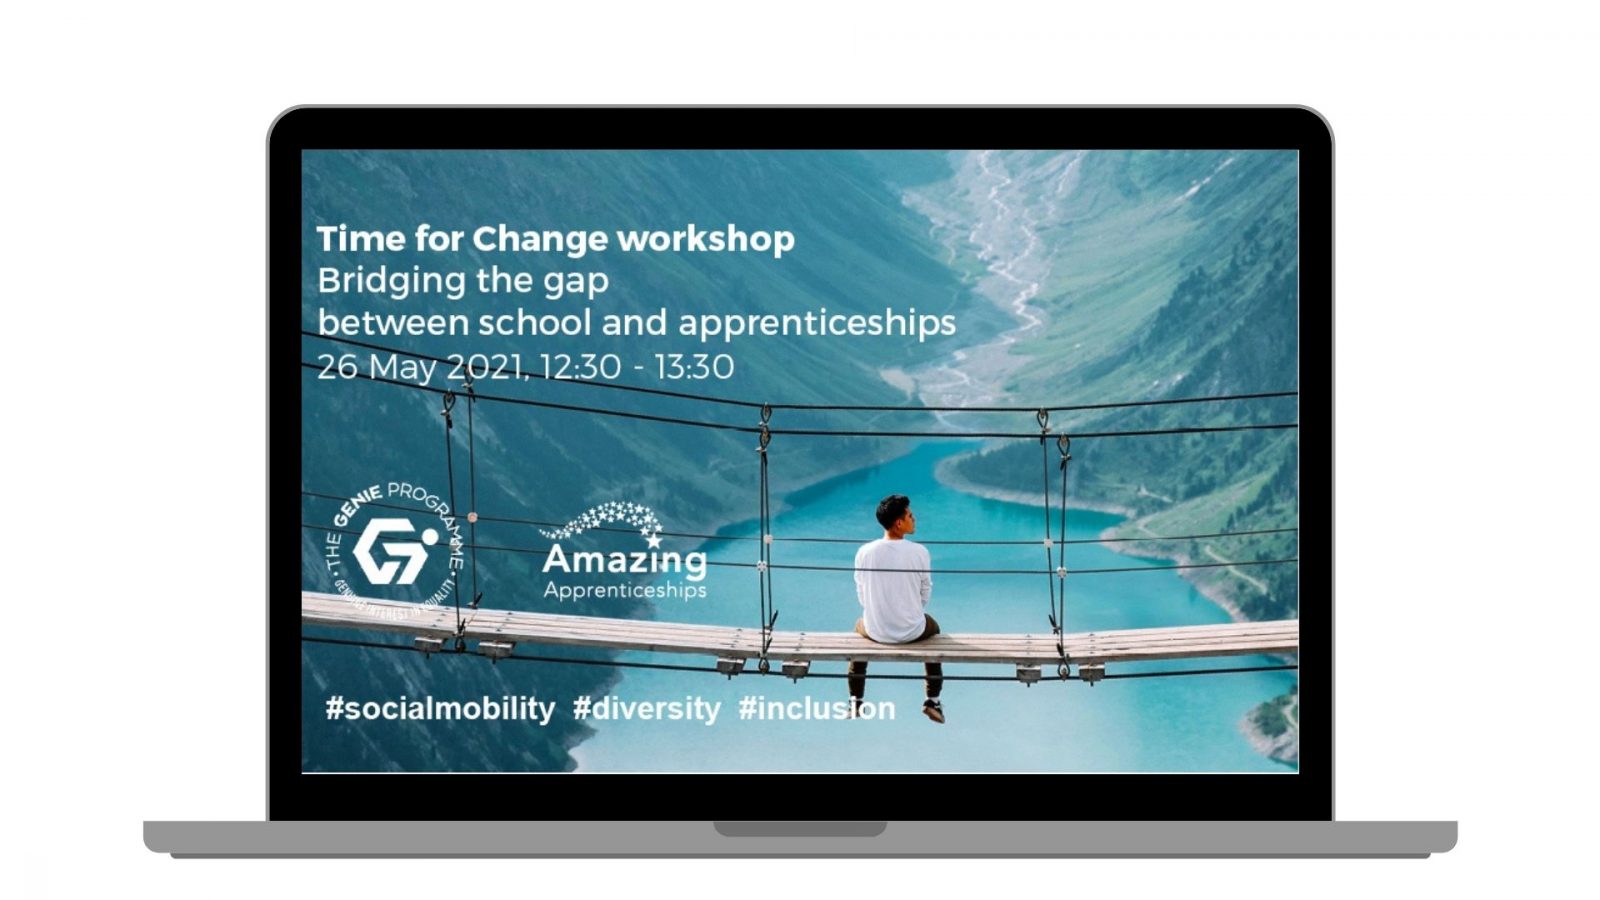 Time for Change: Bridging the gap between schools and apprenticeships